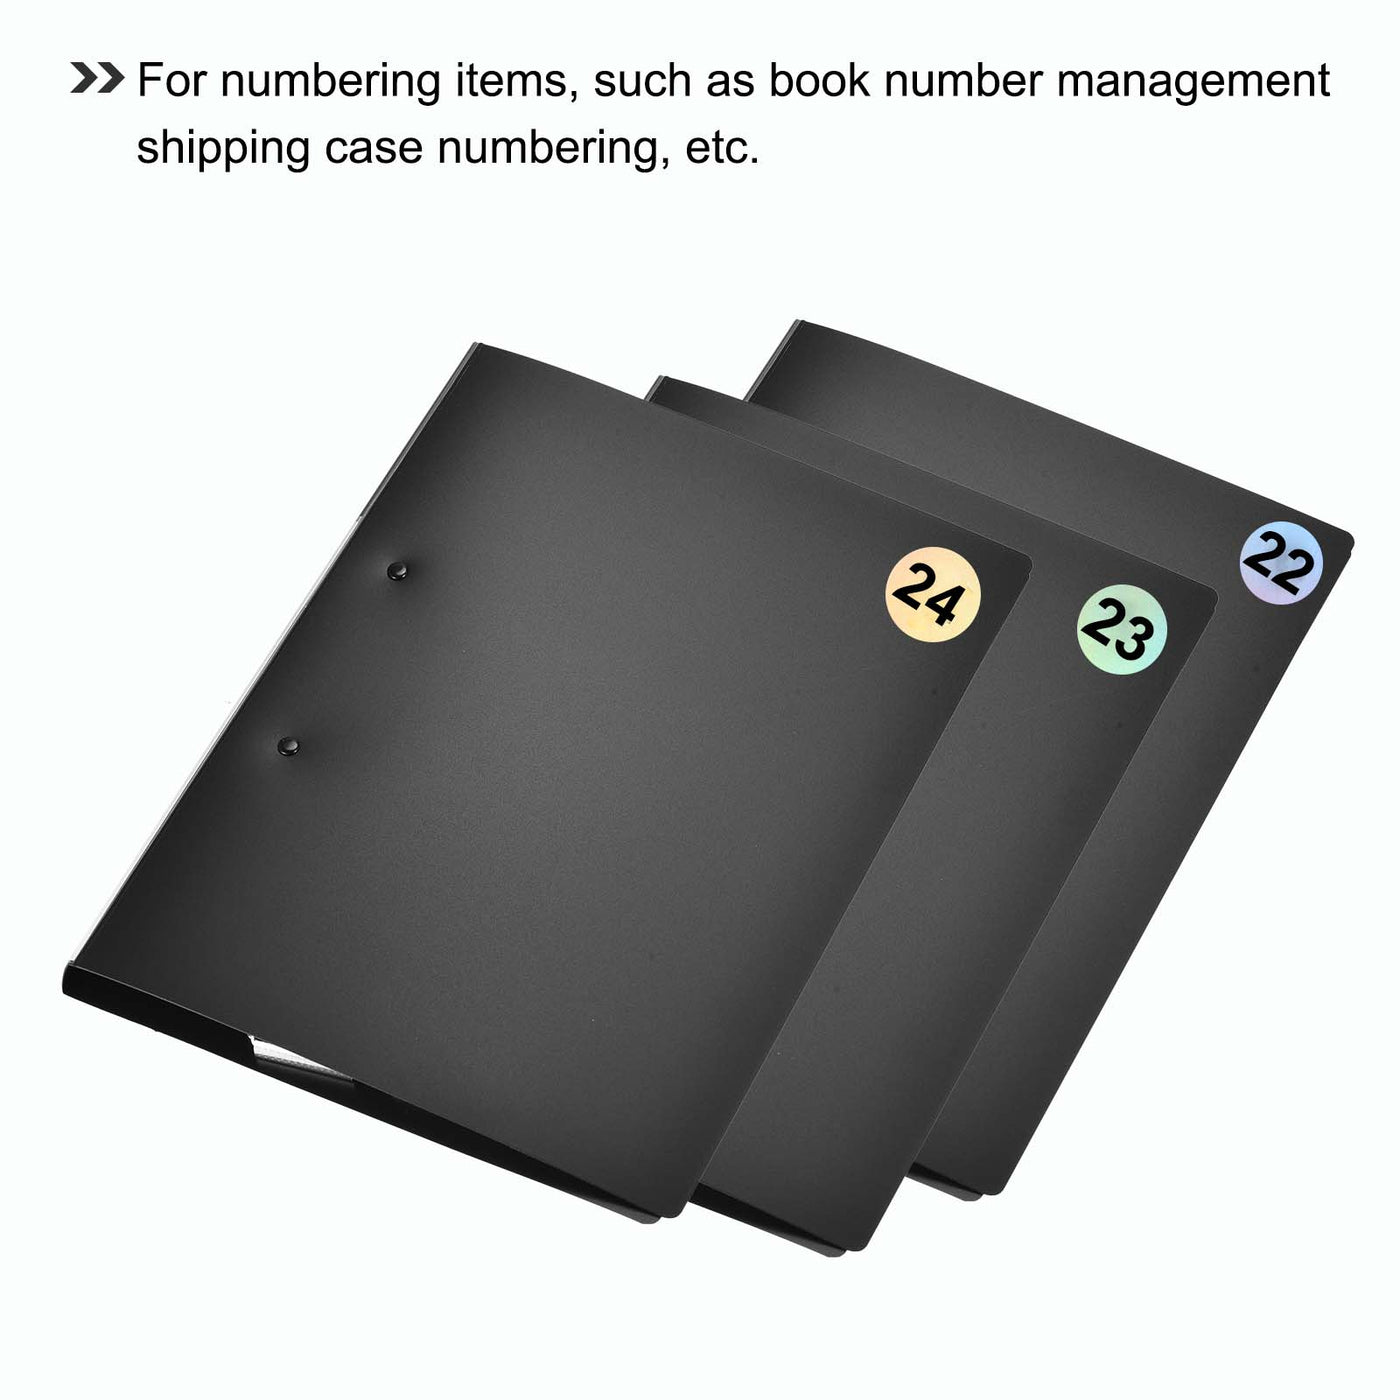 Harfington Laser Number Stickers, Number 22 Round Self Adhesive Reflective Sticker for Inventory, Storage Organizing, 10 Sheets(1000pcs)